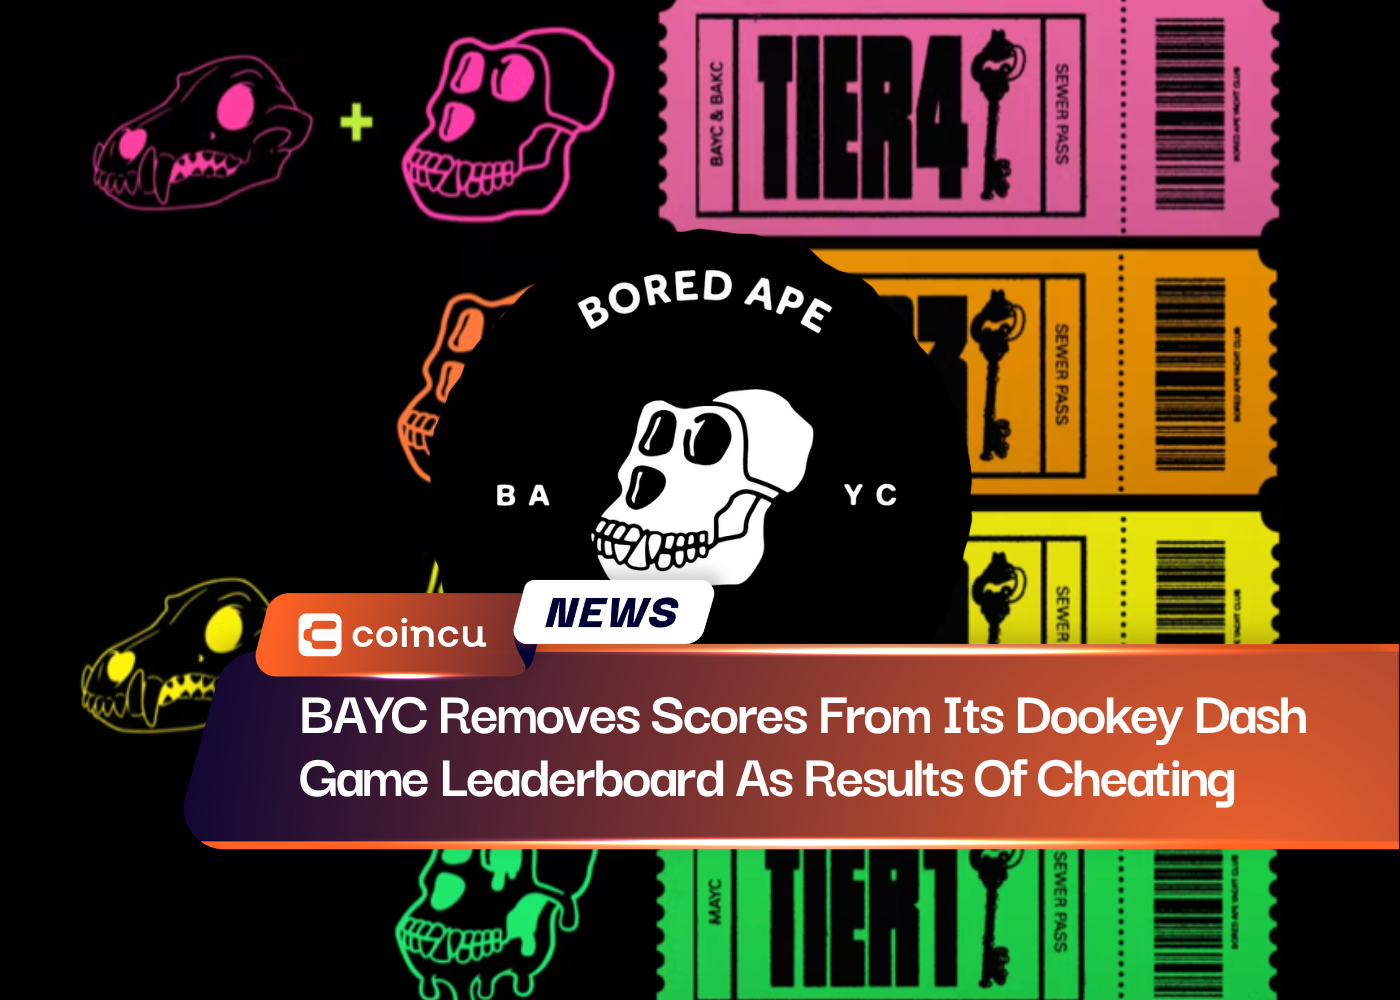 BAYC Removes Scores From Its Dookey Dash Game Leaderboard As Results Of Cheating